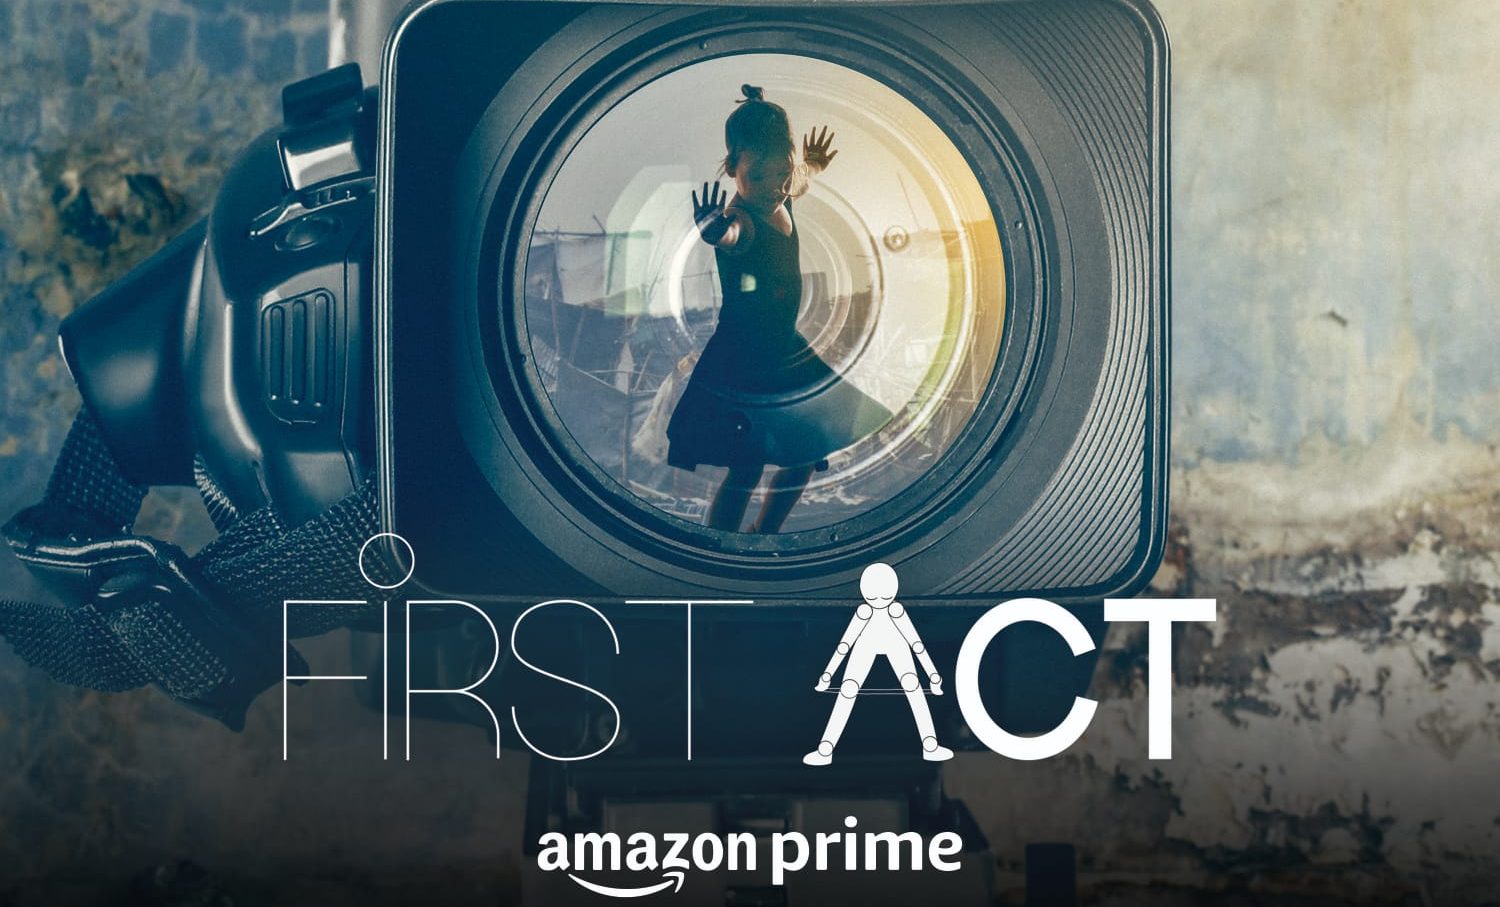 Prime Video launches music album of ‘First Act’!